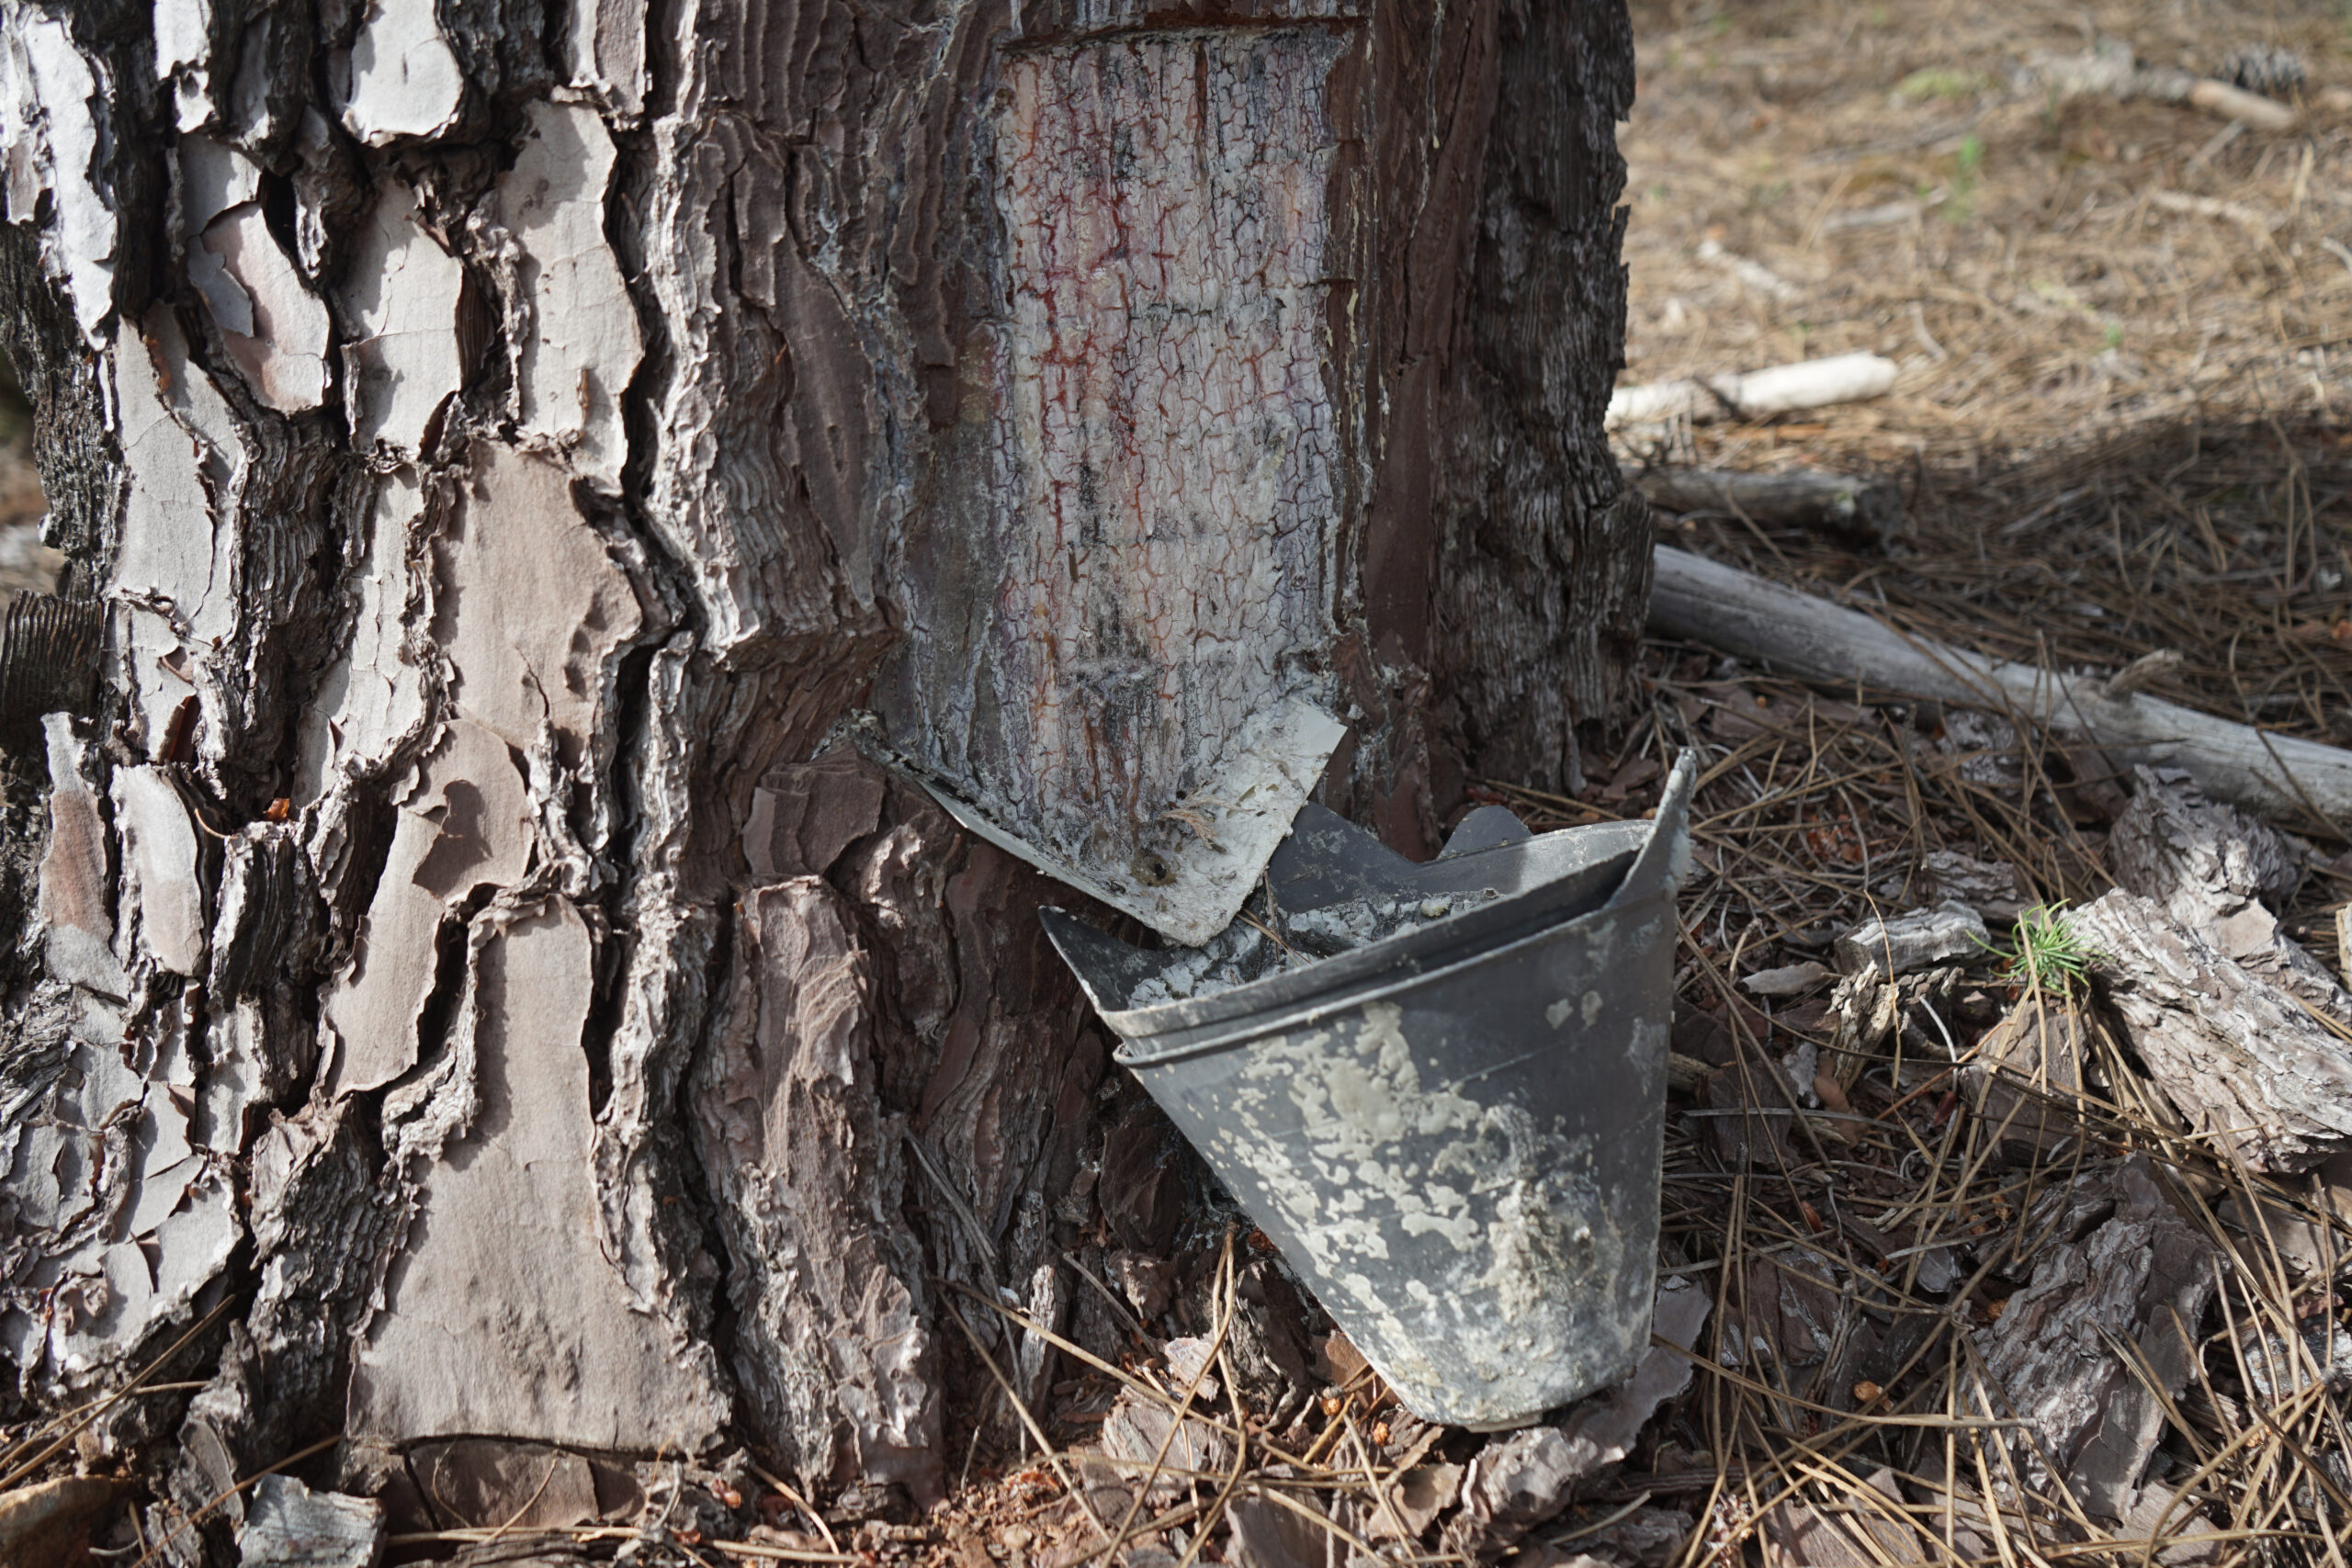 A resin bucket at the bottom of a pine tree in Extremadura, Spain.